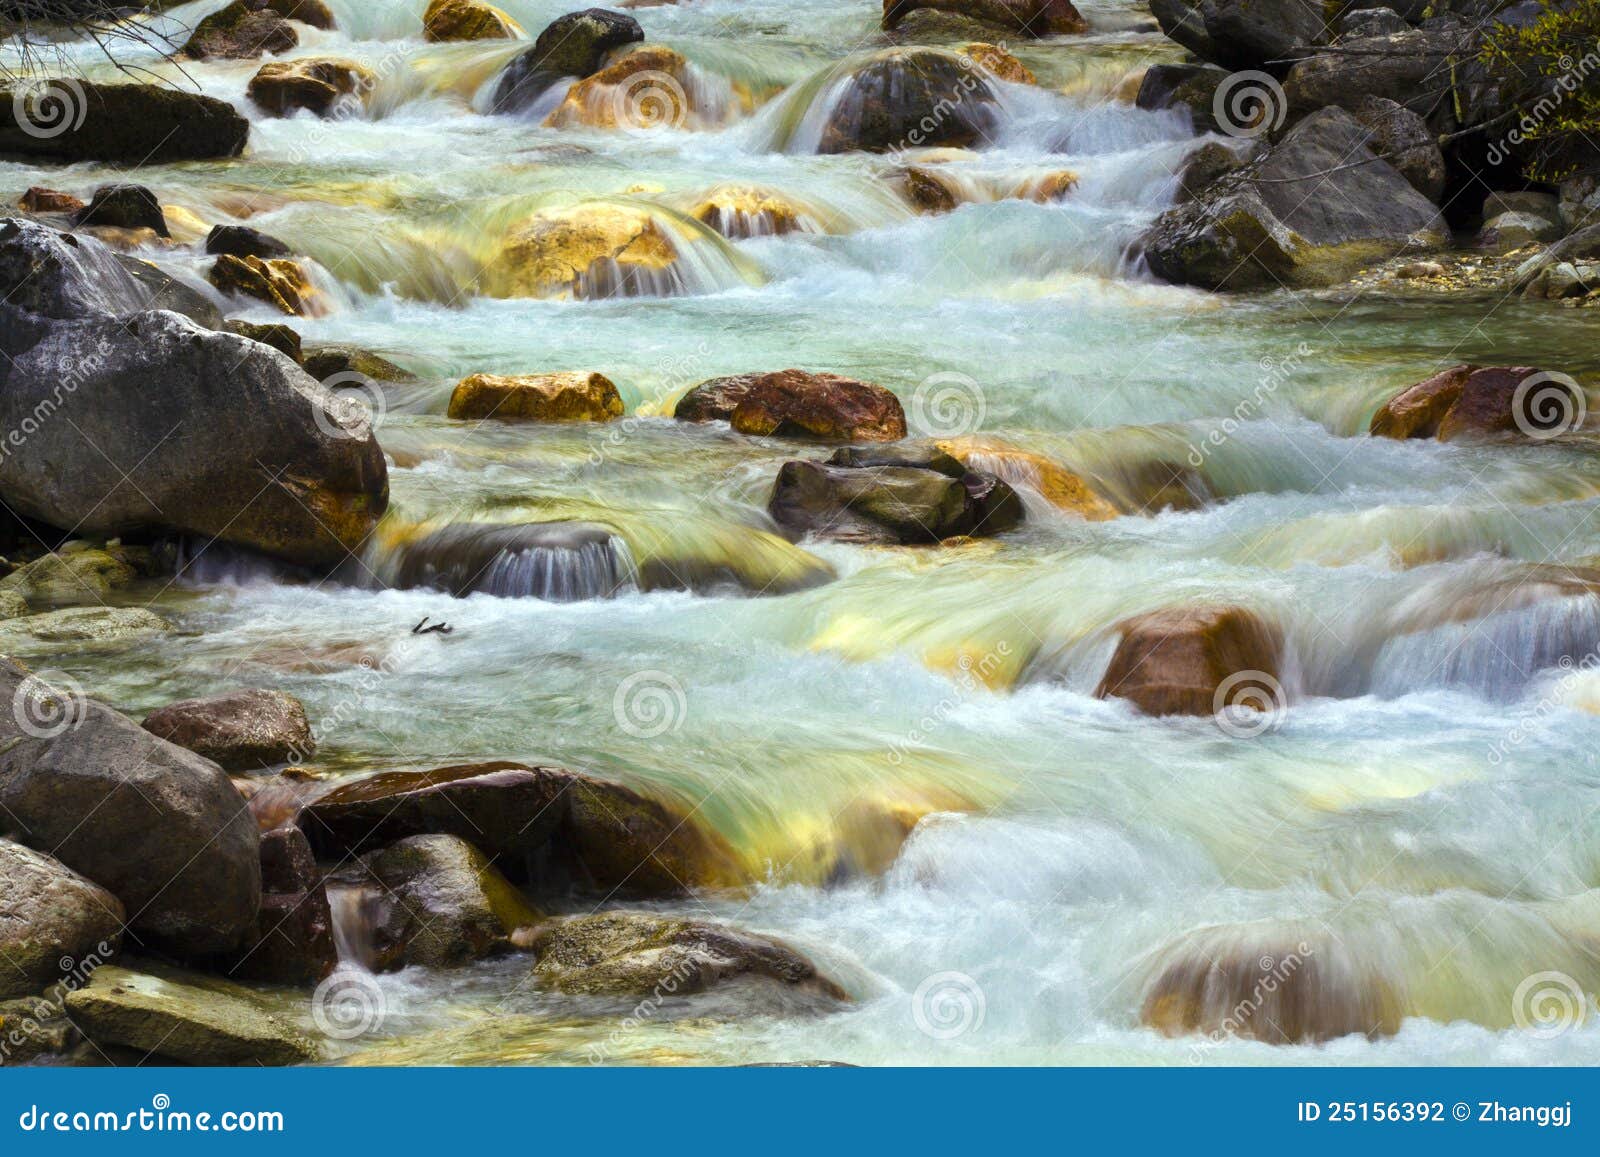 streams and stones in the river